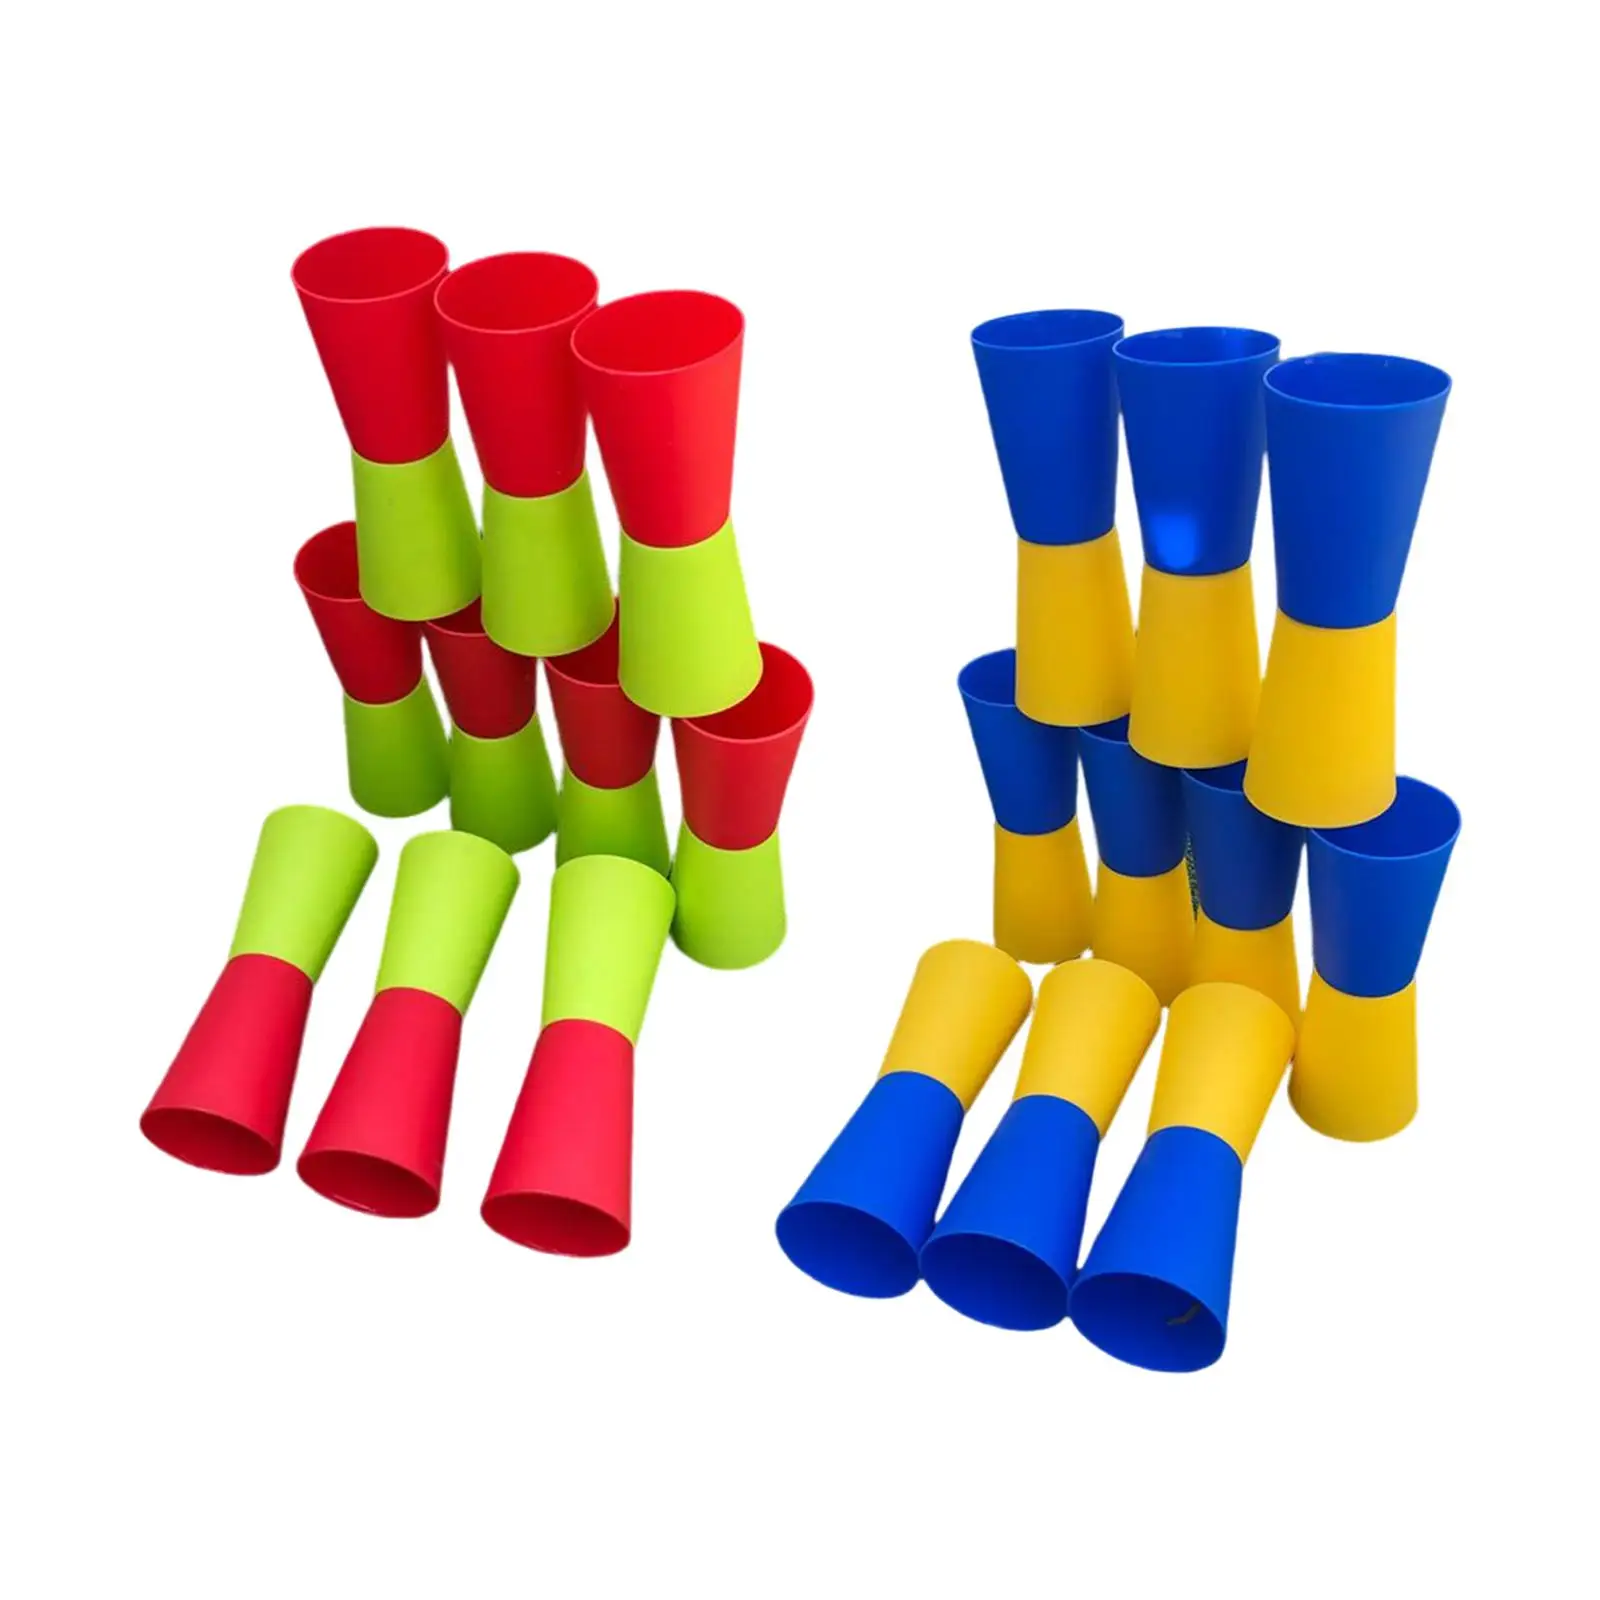 10x Flip Cups Speed Agility Training Aid Exercise Running Reversed Cups for Football Activity Festive Gym Events Rugby